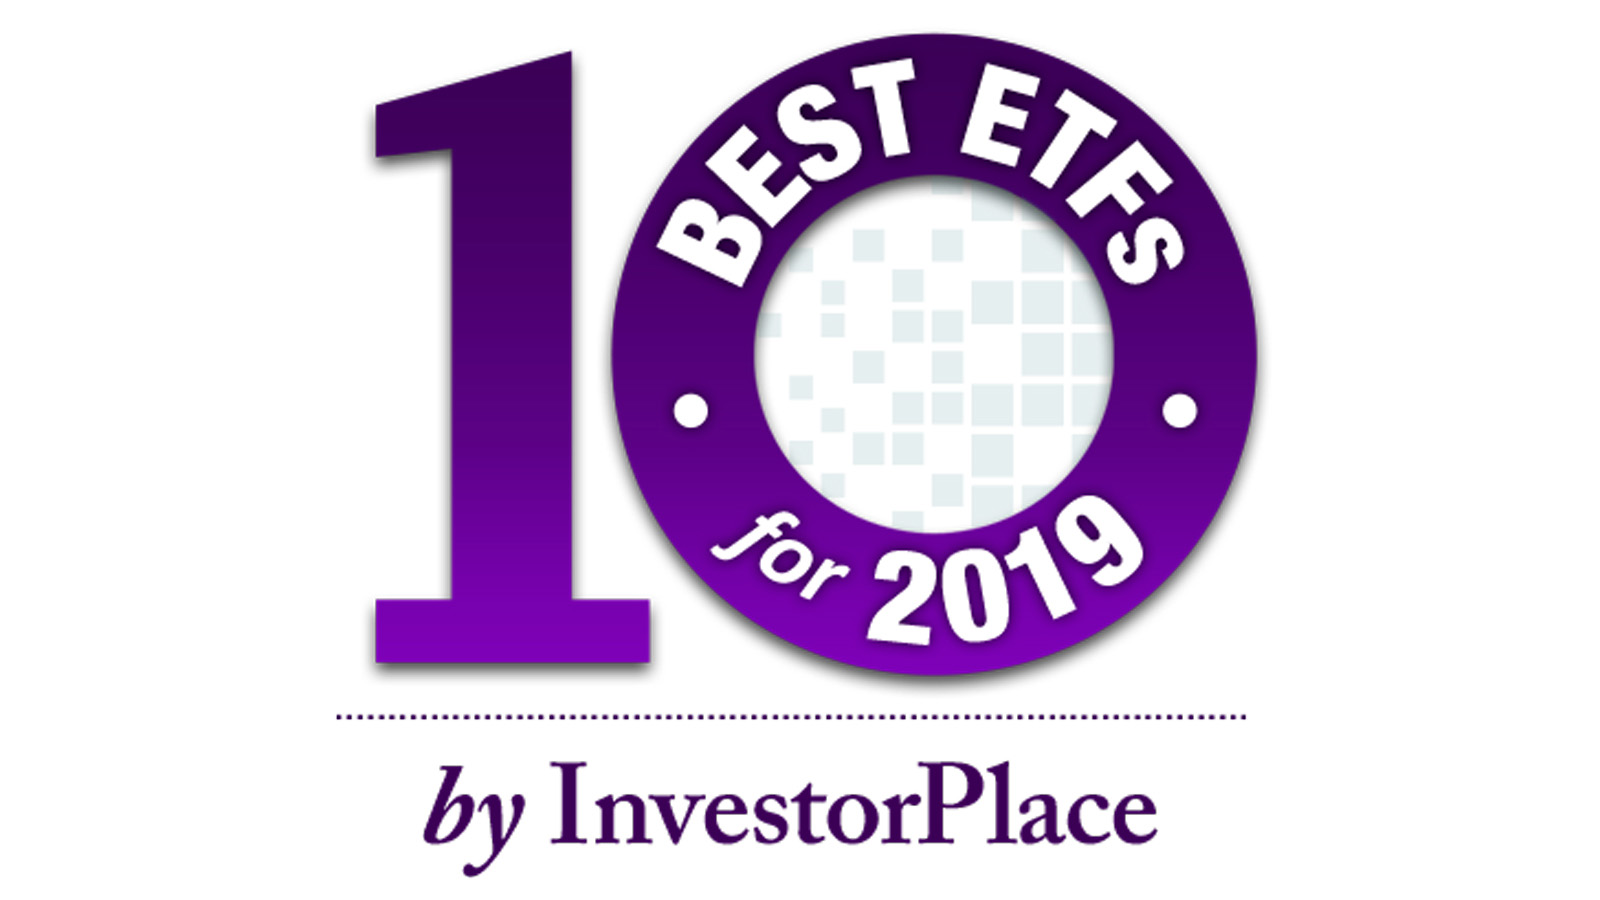 Best ETFs for 2019: The Powershares Water Resource ETF Is Steamin’ - Investorplace.com